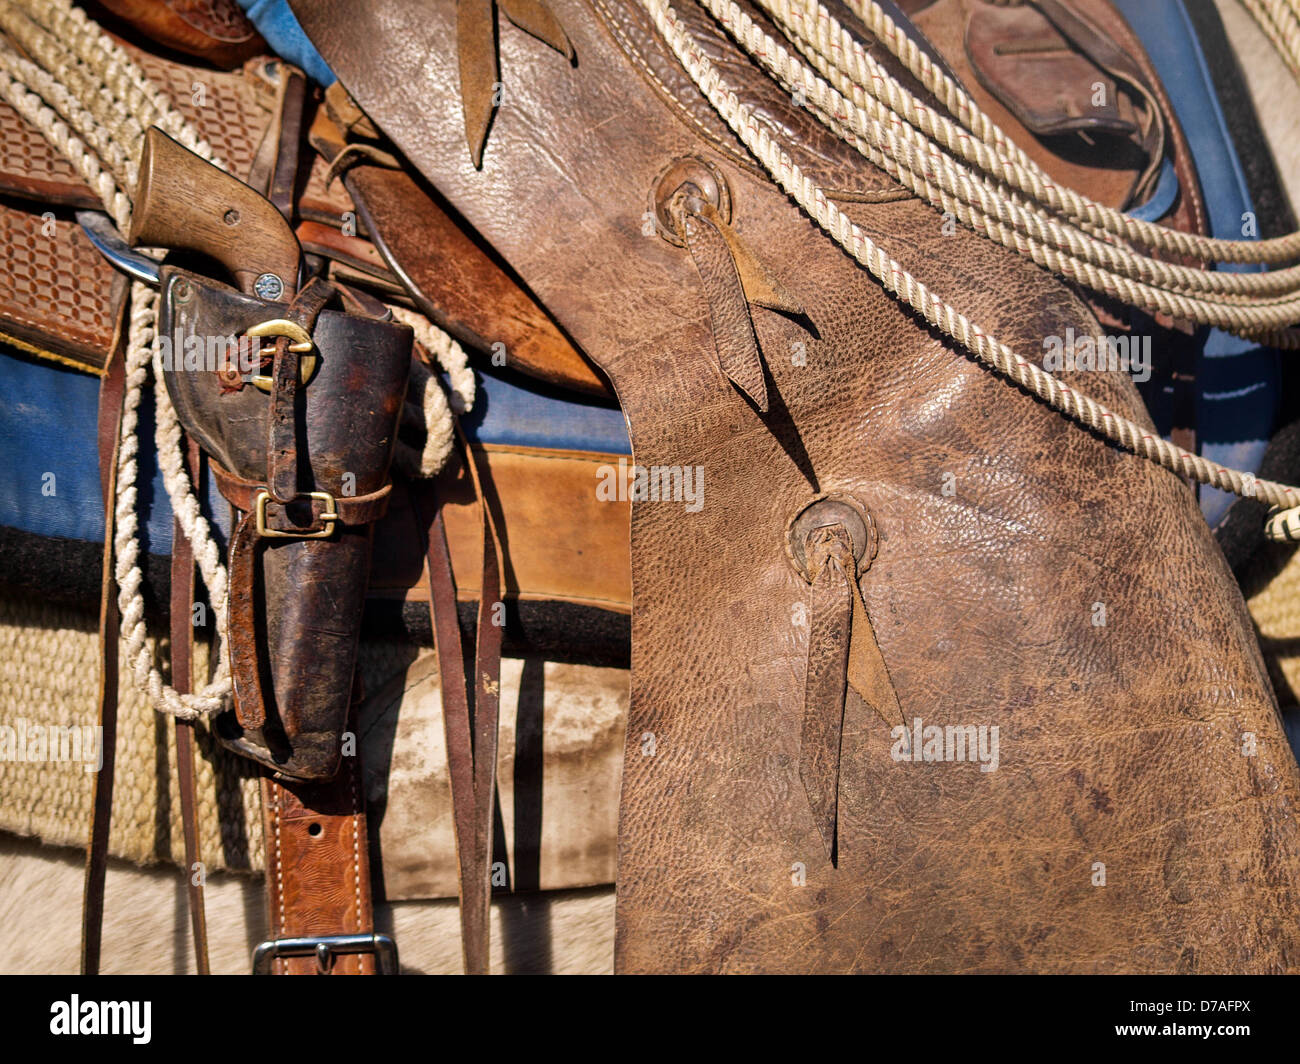 Working  Texas cowboy  saddle with chaps lariat and pistol. Stock Photo